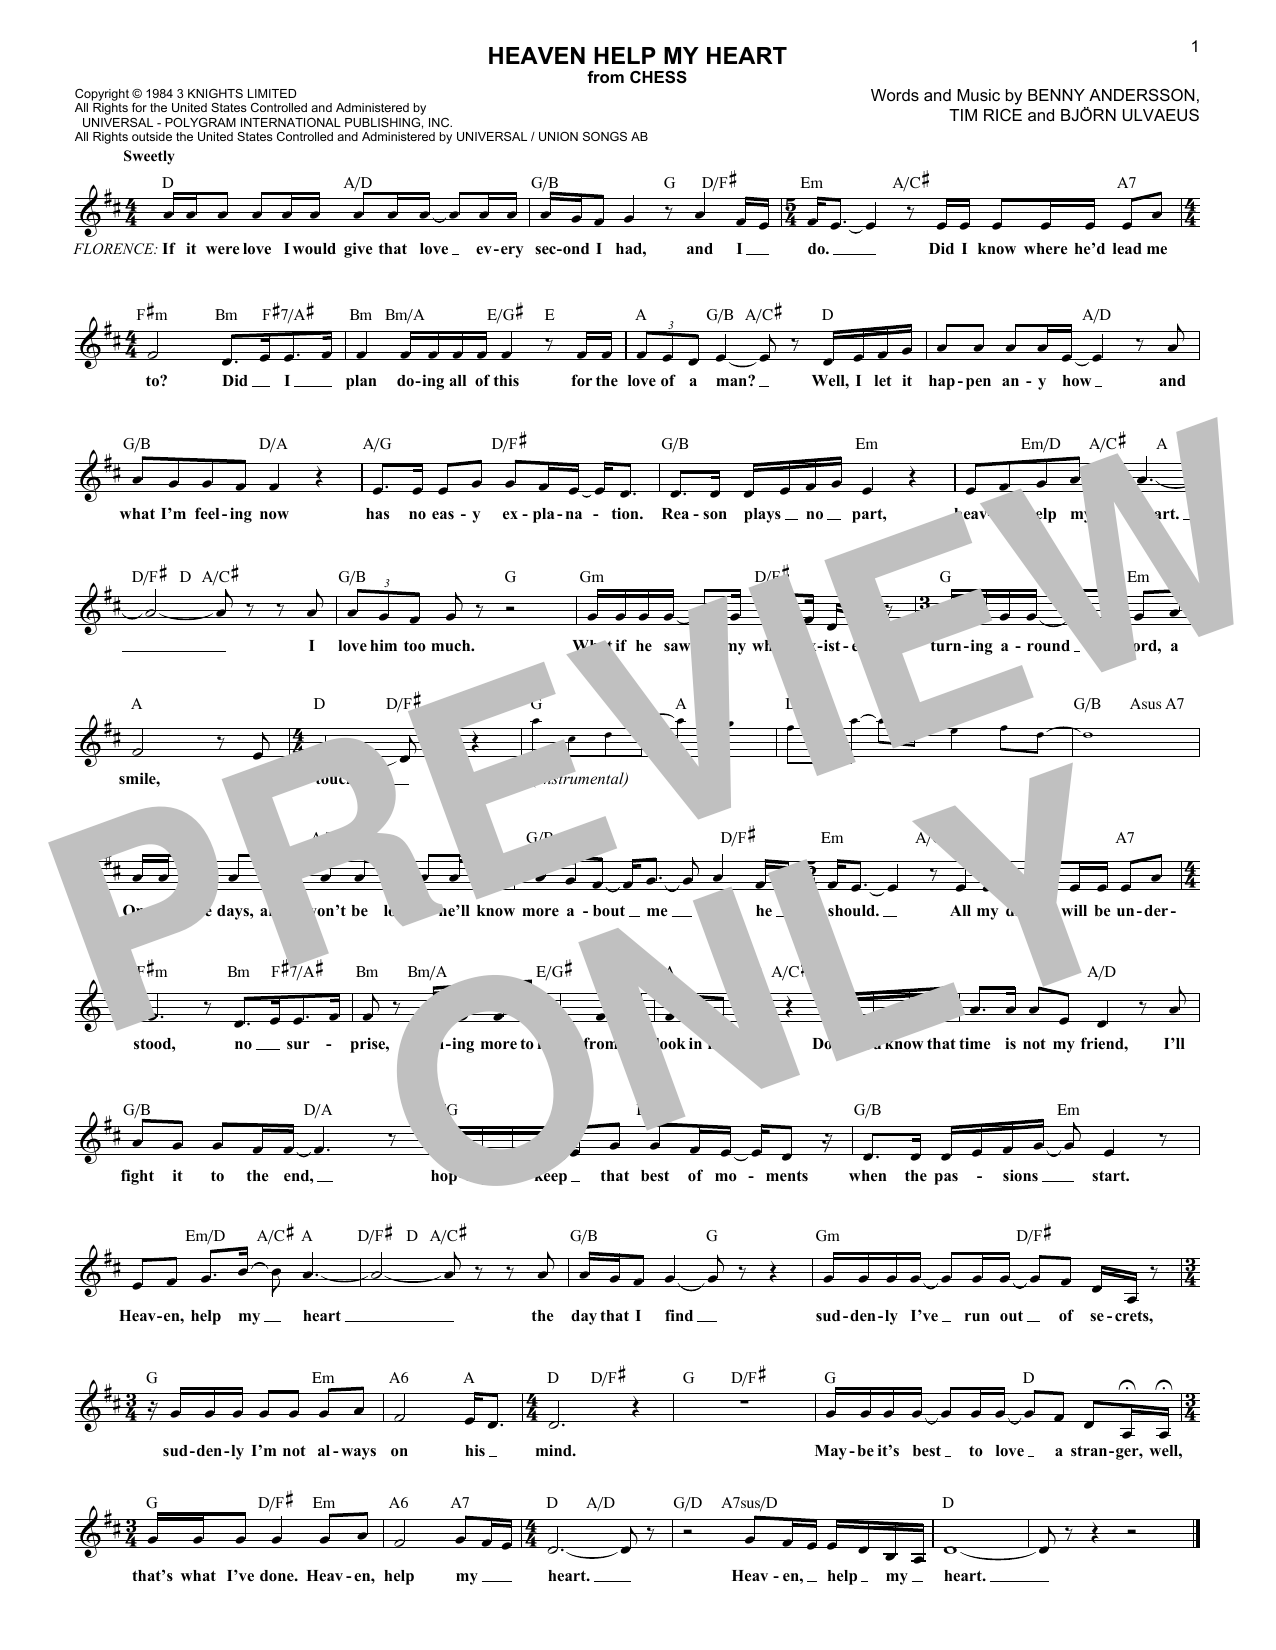 Download ANDERSSON And ULVAEUS Heaven Help My Heart (from Chess) Sheet Music